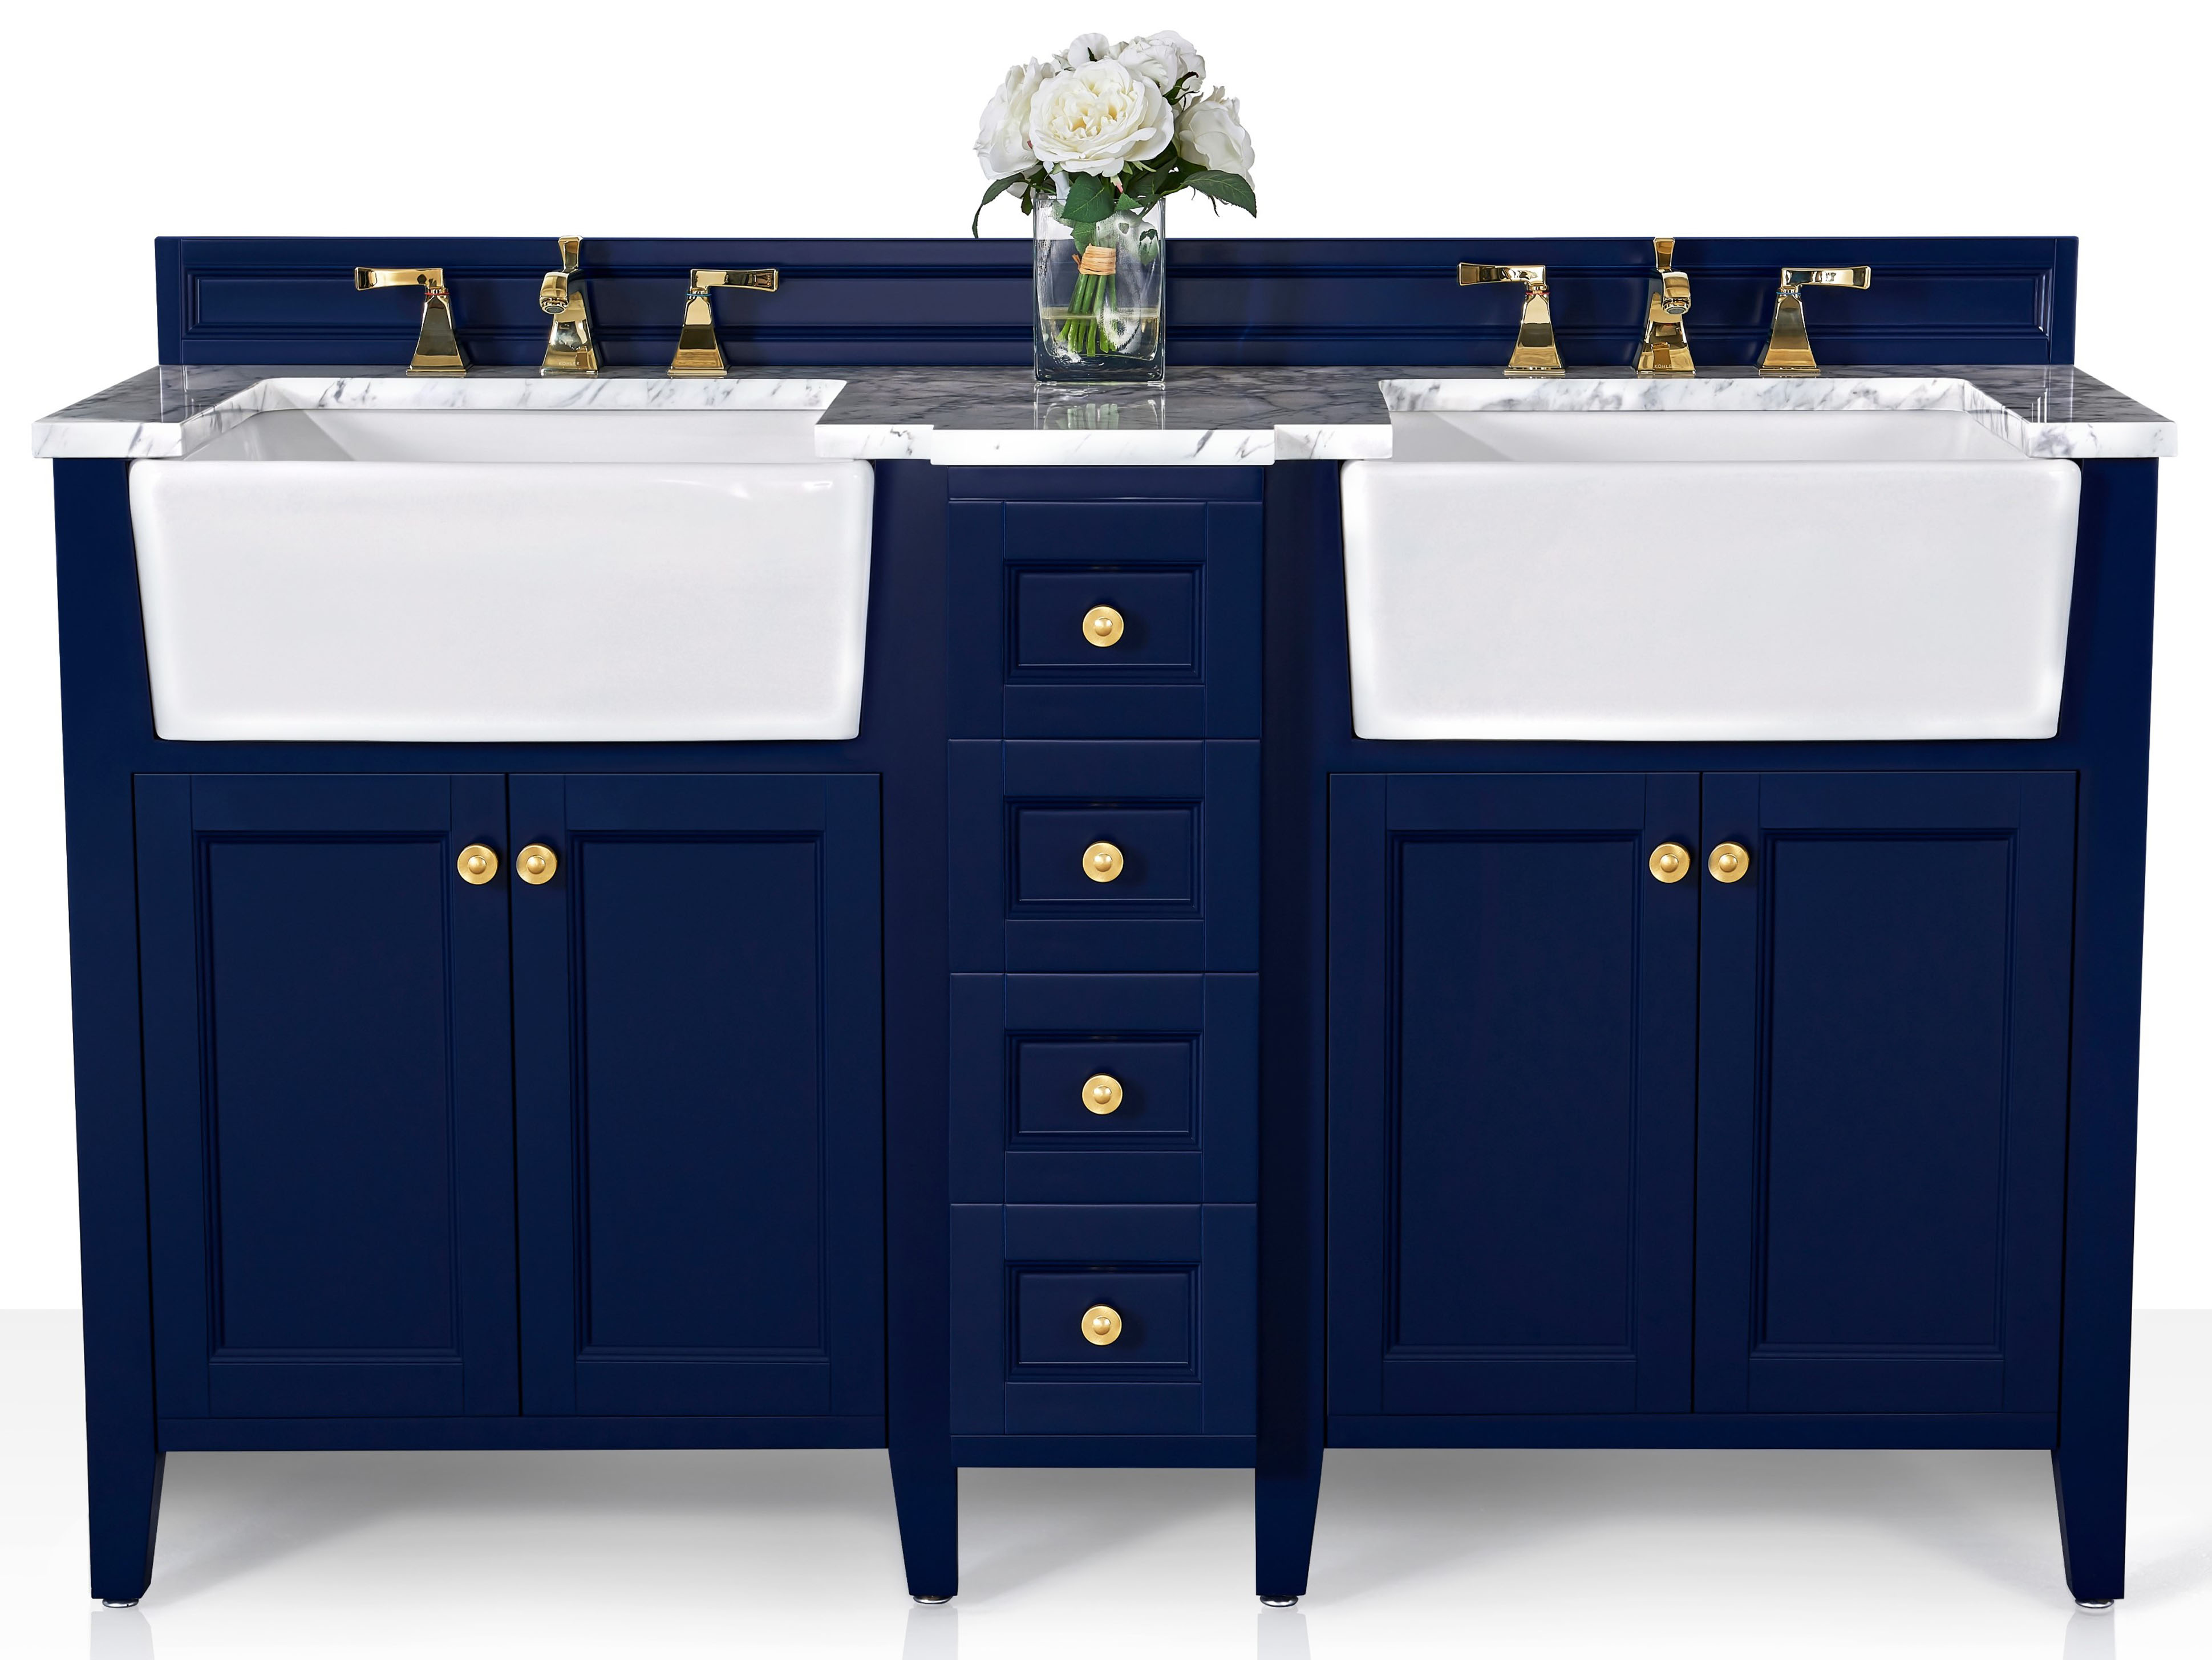 60" Bath Vanity Set in Heritage Blue with Italian Carrara White Marble Vanity Top and White Undermount Basin with Gold Hardware